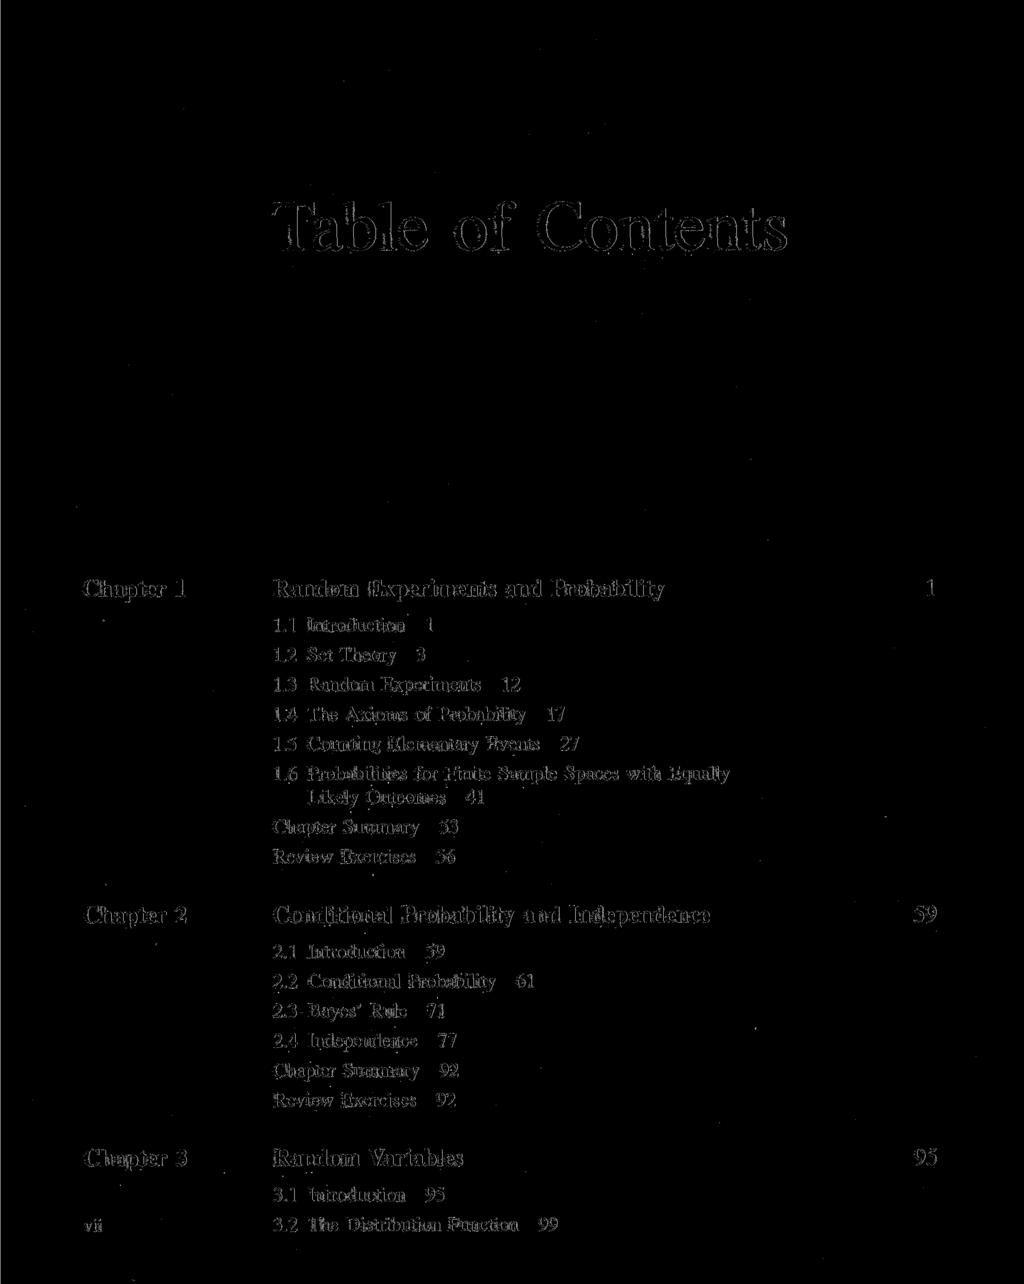 Table of Contents Chapter 1 Random Experiments and Probability 1 1.1 Introduction 1 1.2 Set Theory 3 1.3 Random Experiments 12 1.4 The Axioms of Probability 17 1.5 Counting Elementary Events 27 1.